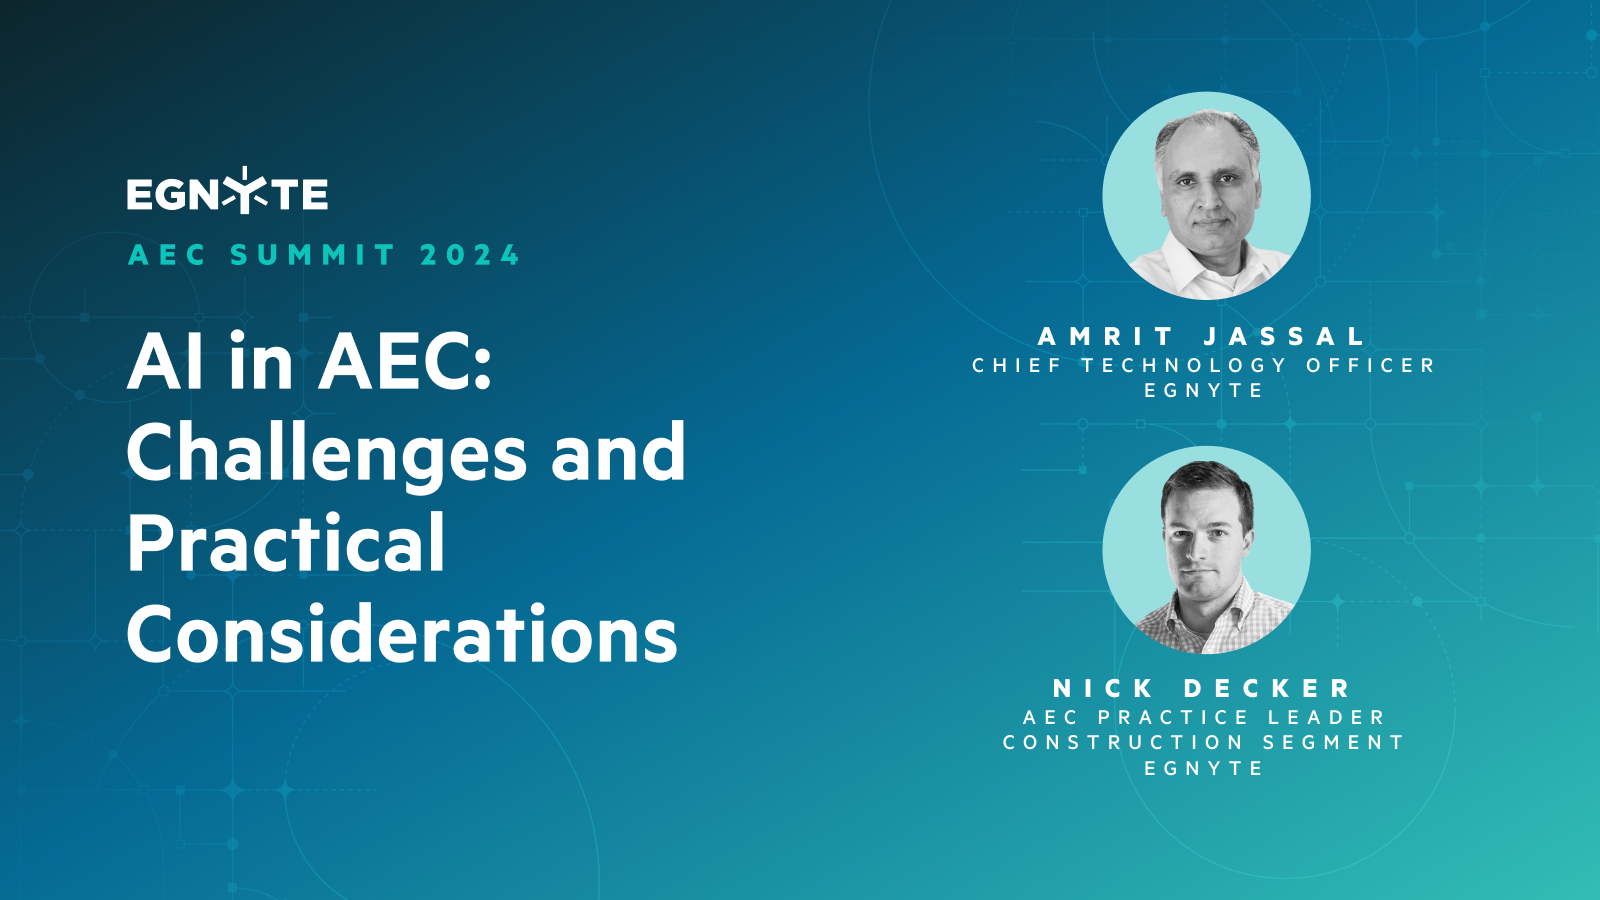 AI in AEC: Challenges and Practical Considerations